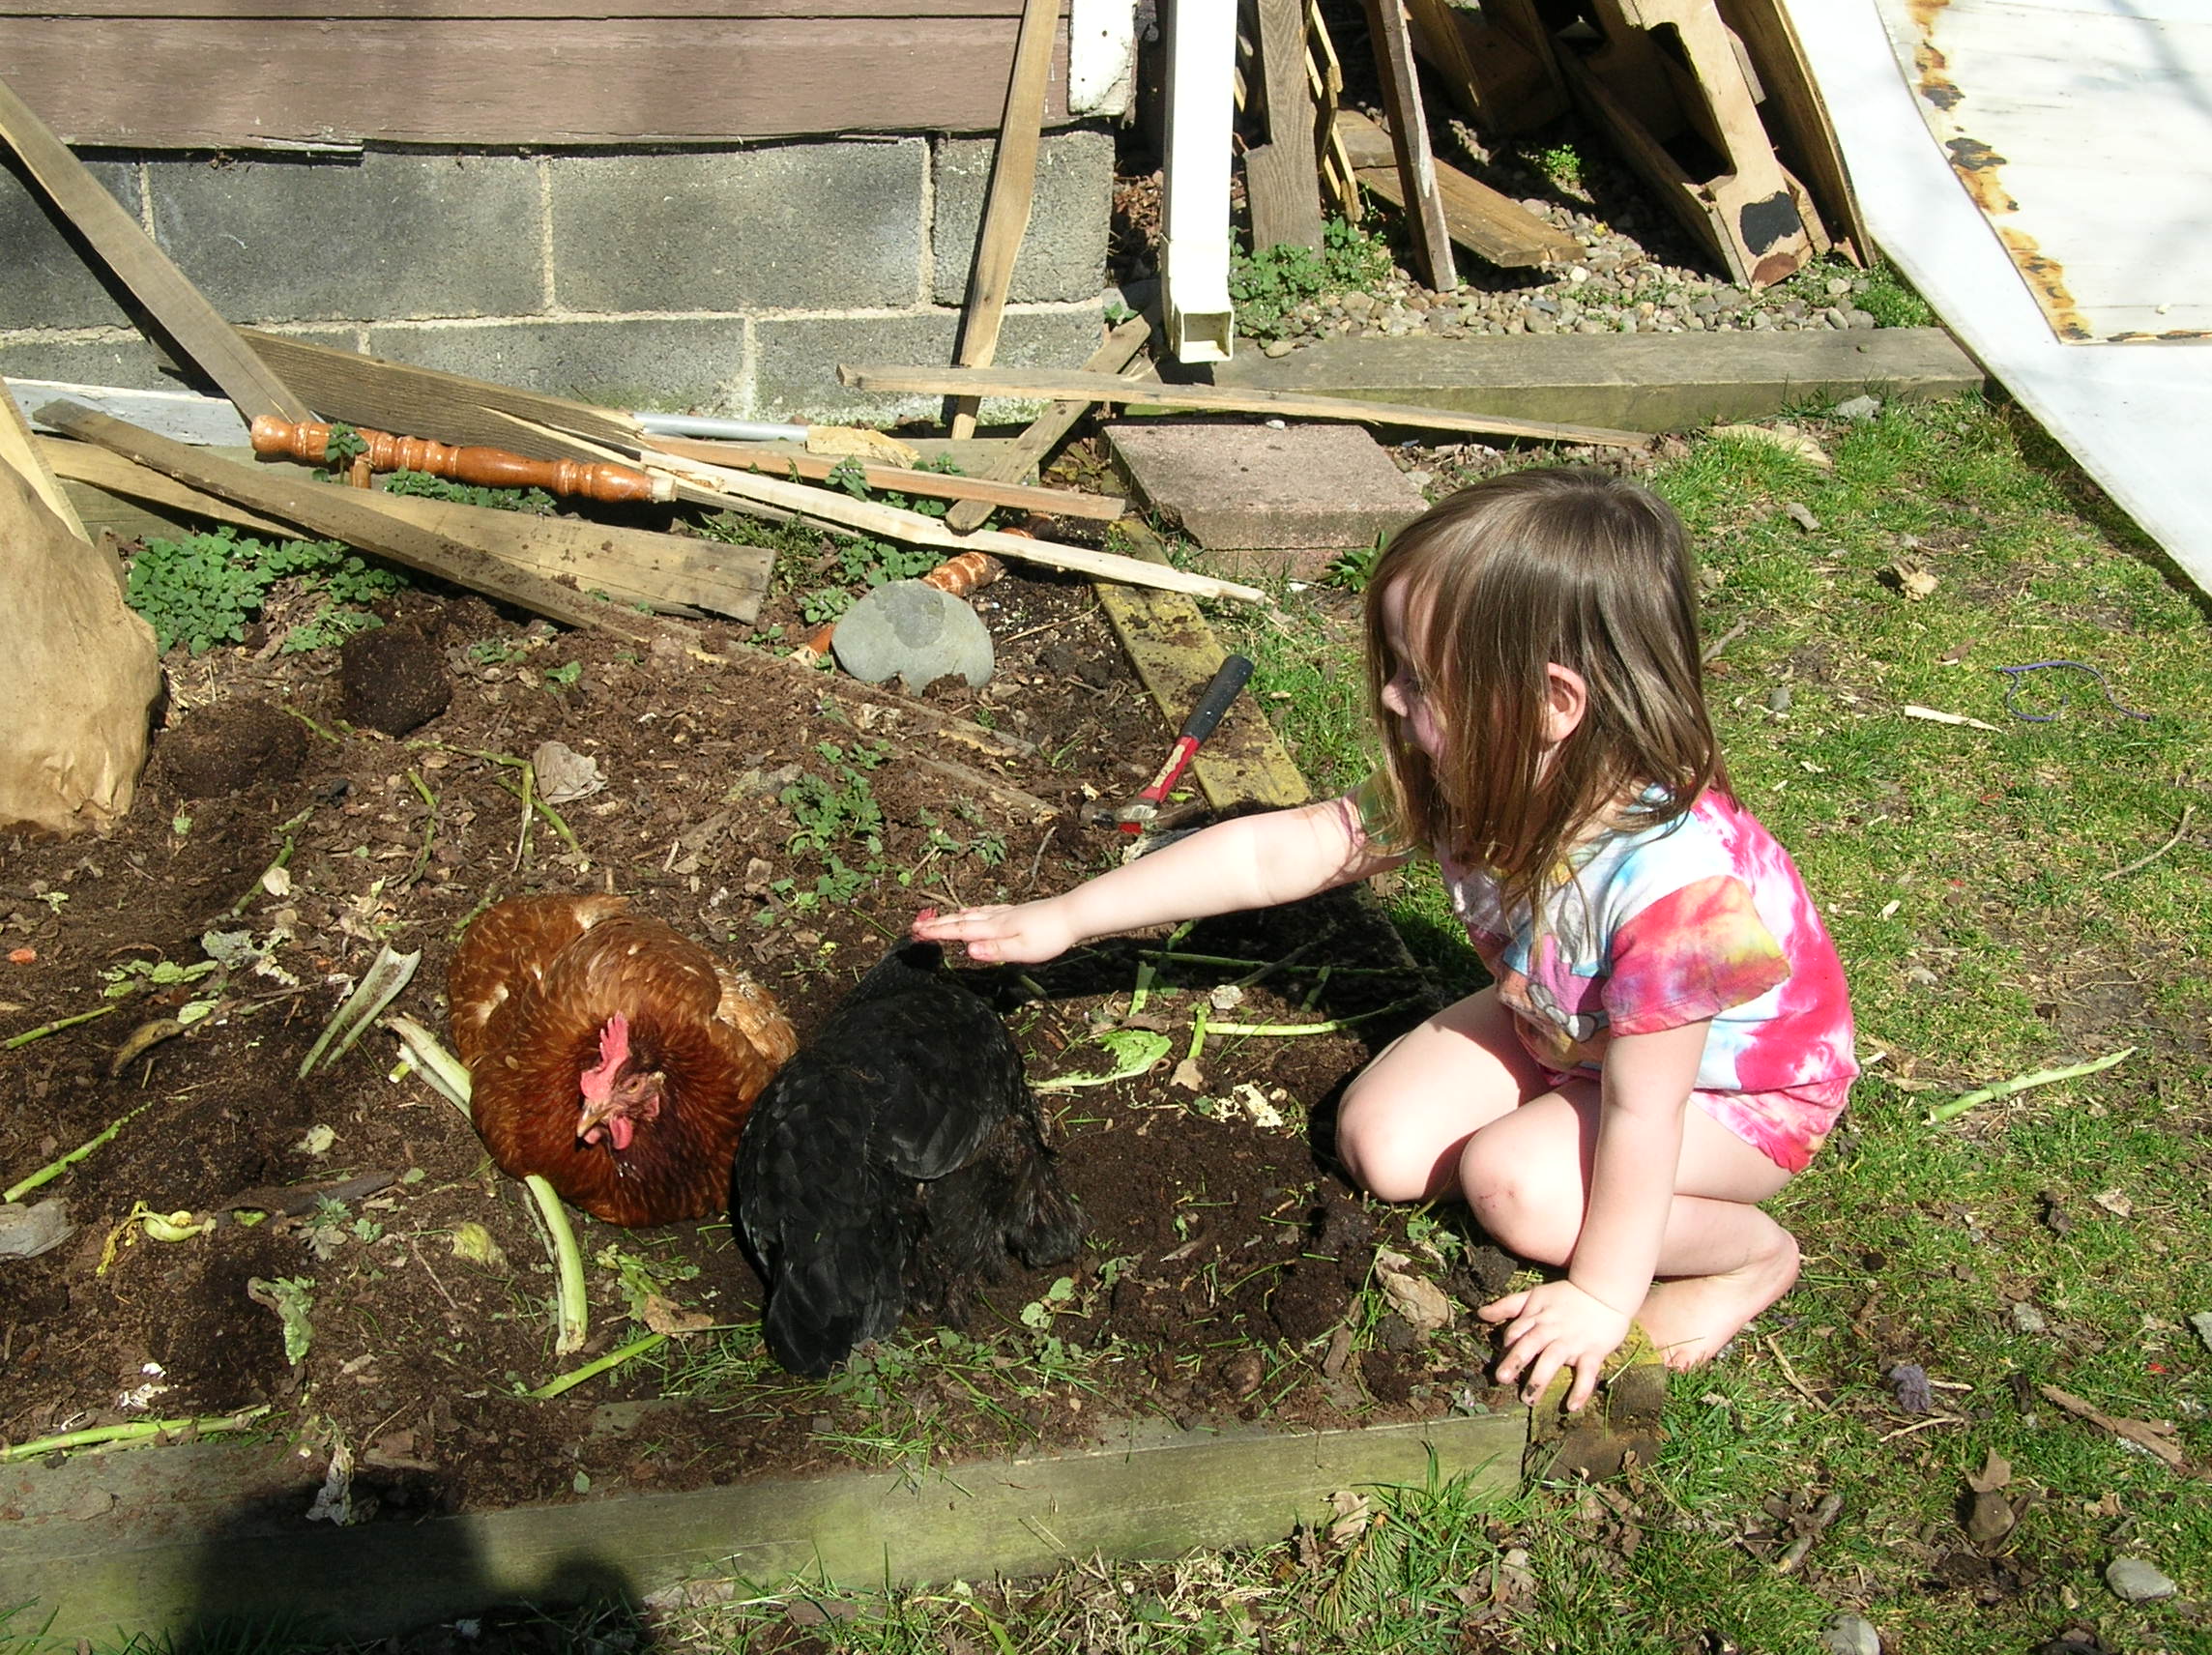 Who wants to dust bathe in compost?  Chickens, that's who!